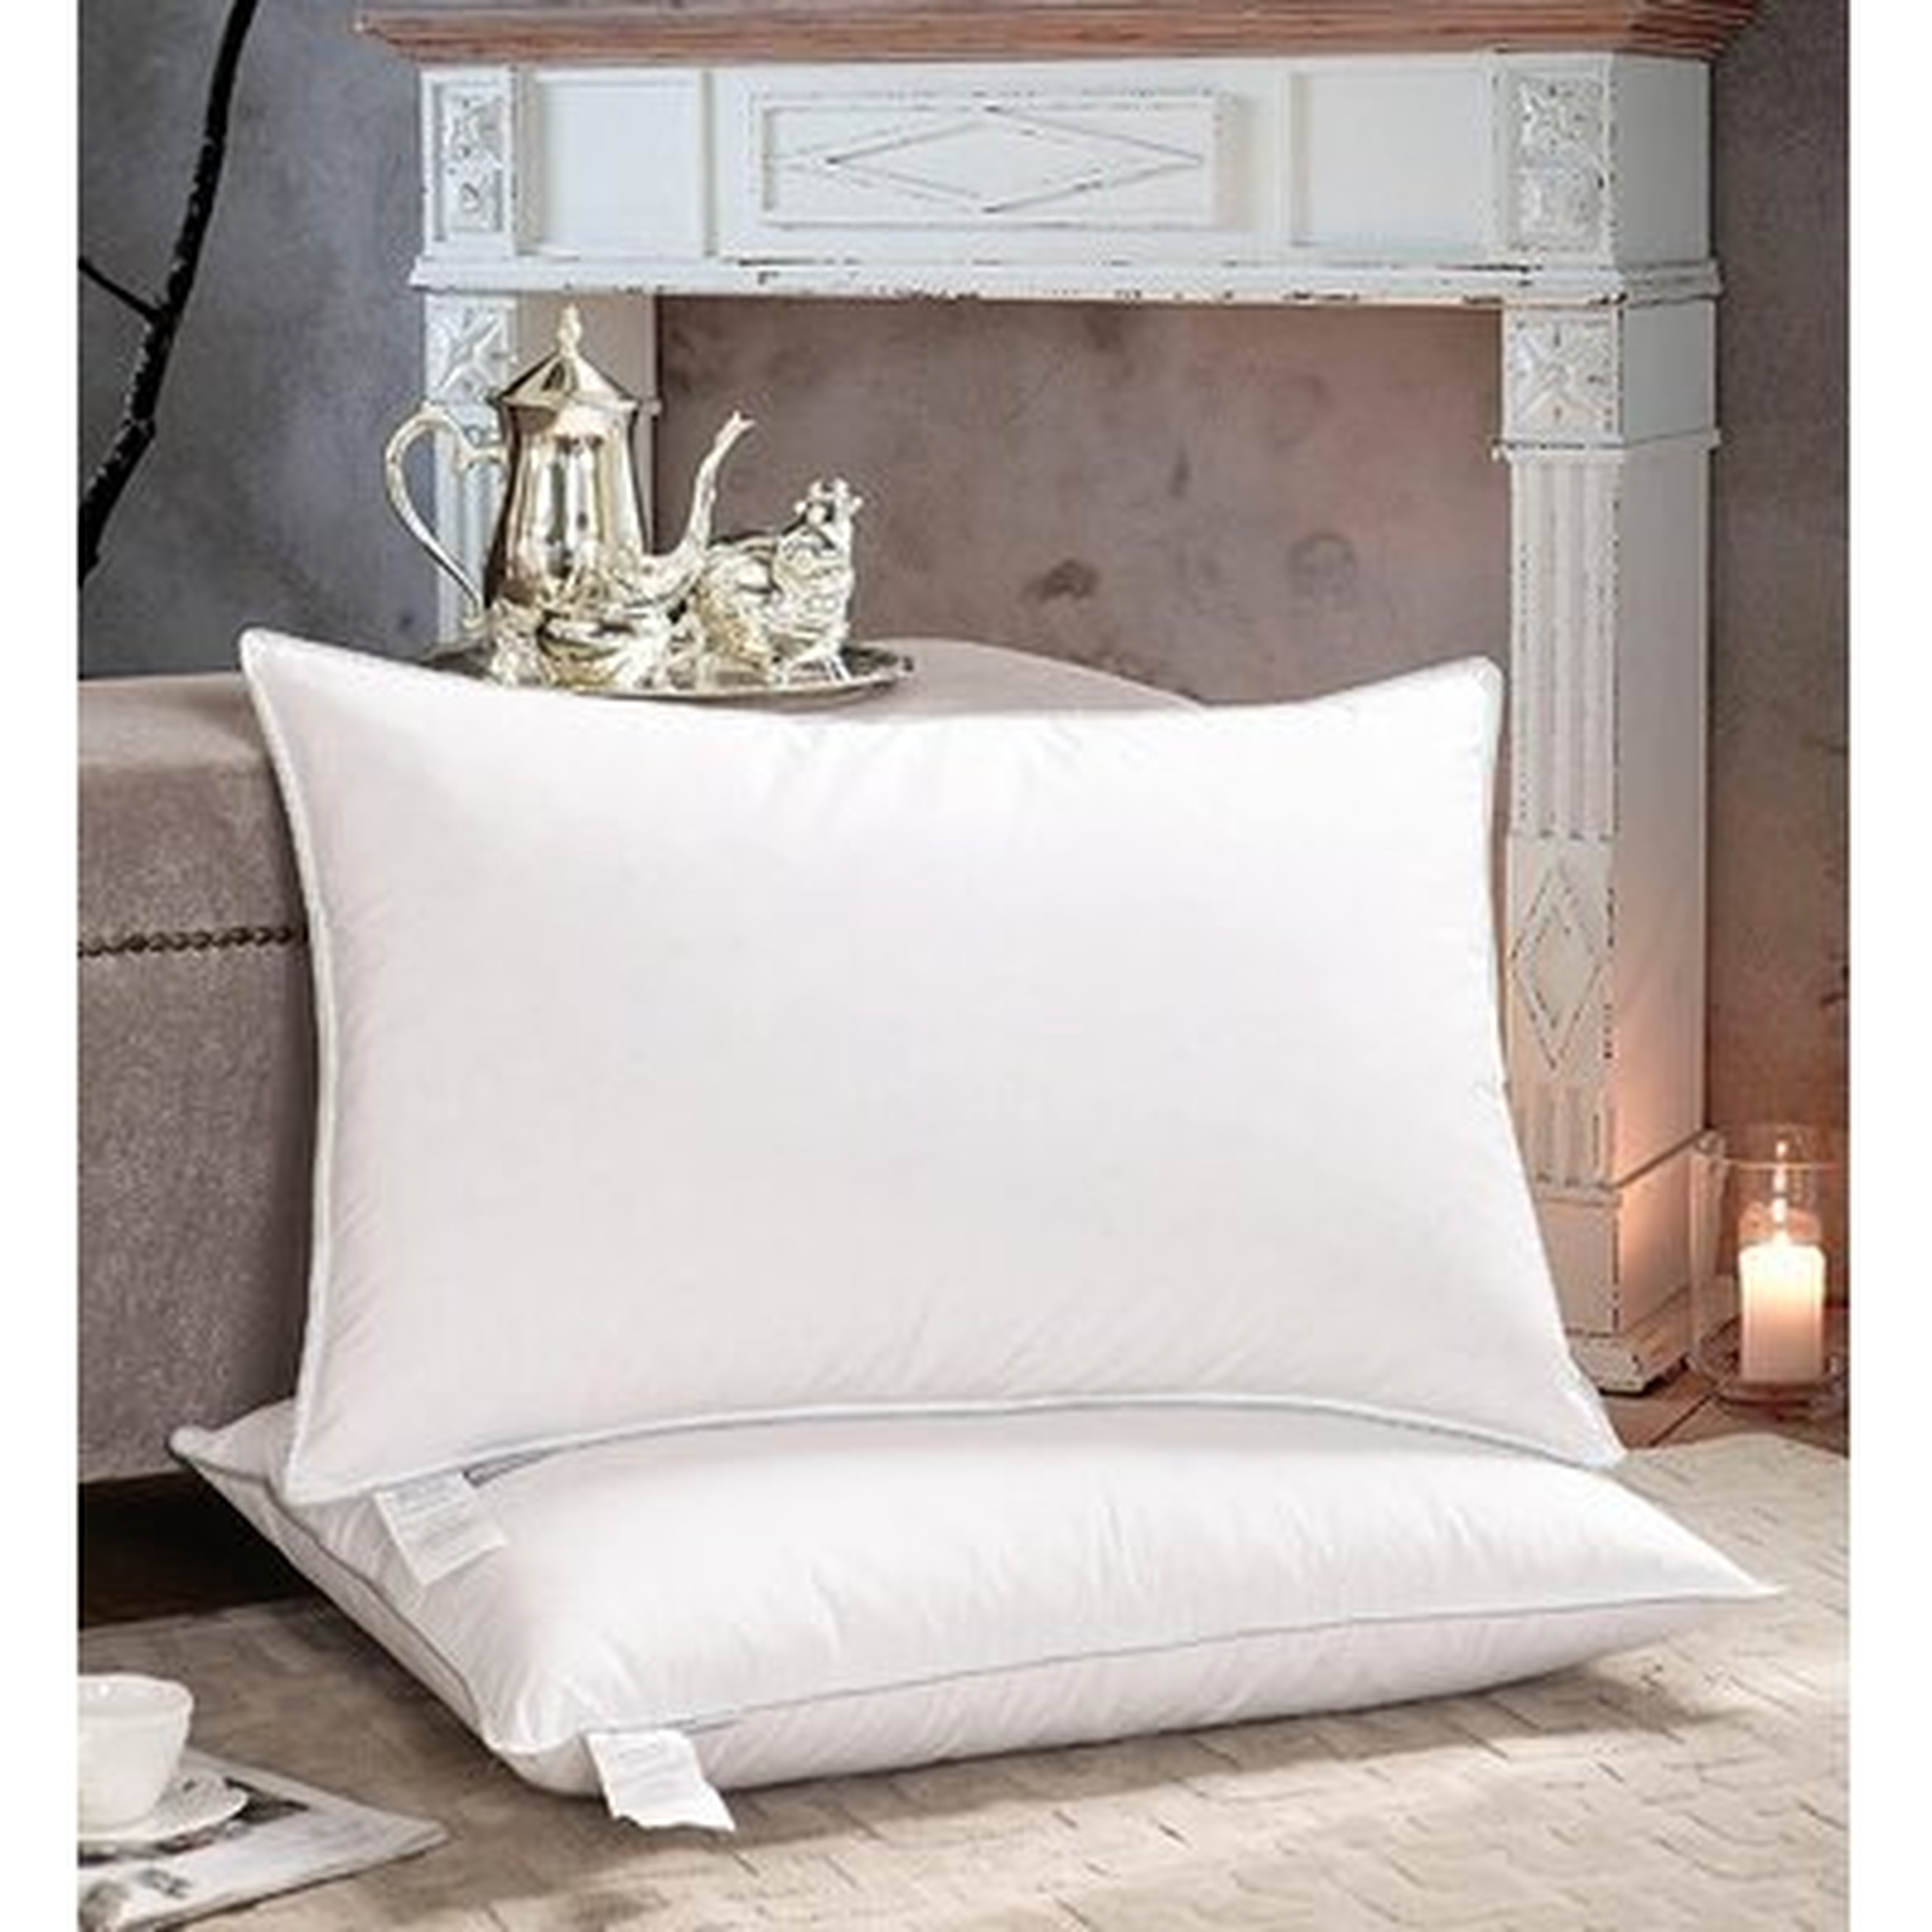 Goose Down And Feather Pillow King Size Bed Pillow, 2 Pack Firm White Goose Feather Down Pillow,Cotton Cover Fashionable Piping - Wayfair